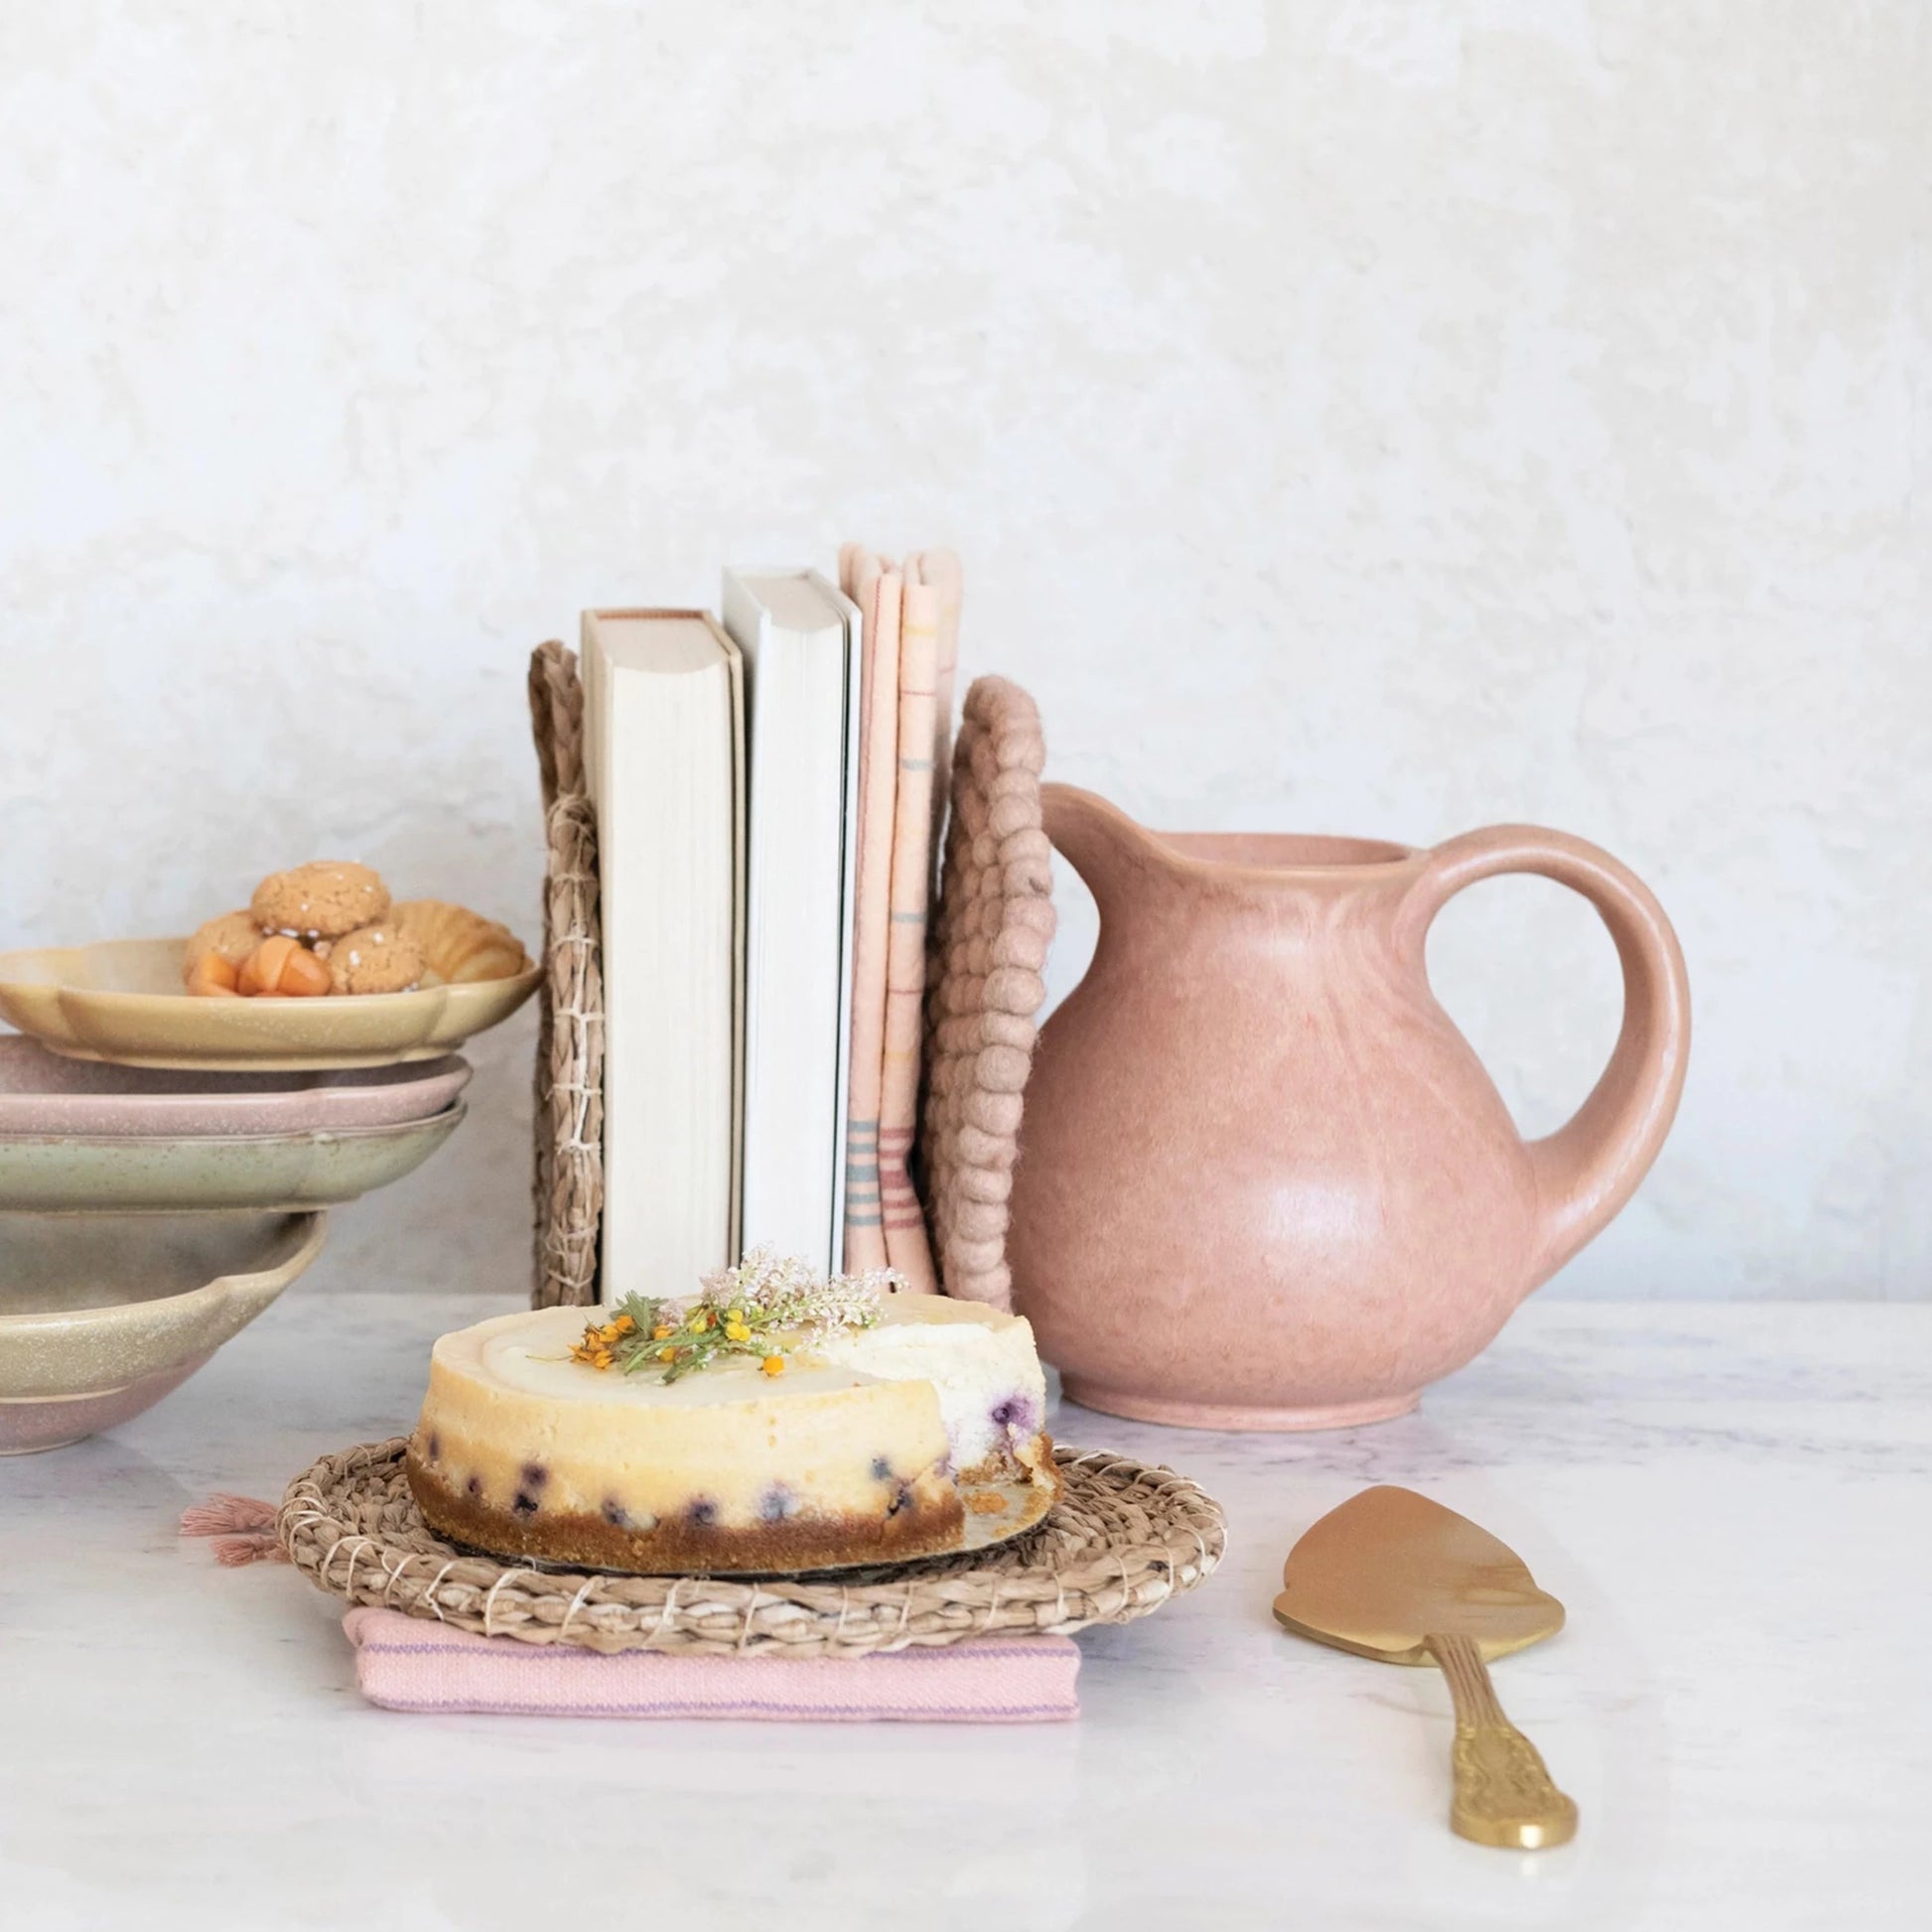 pink pitcher set on a countertop with books, plates, a cake, and cake server.